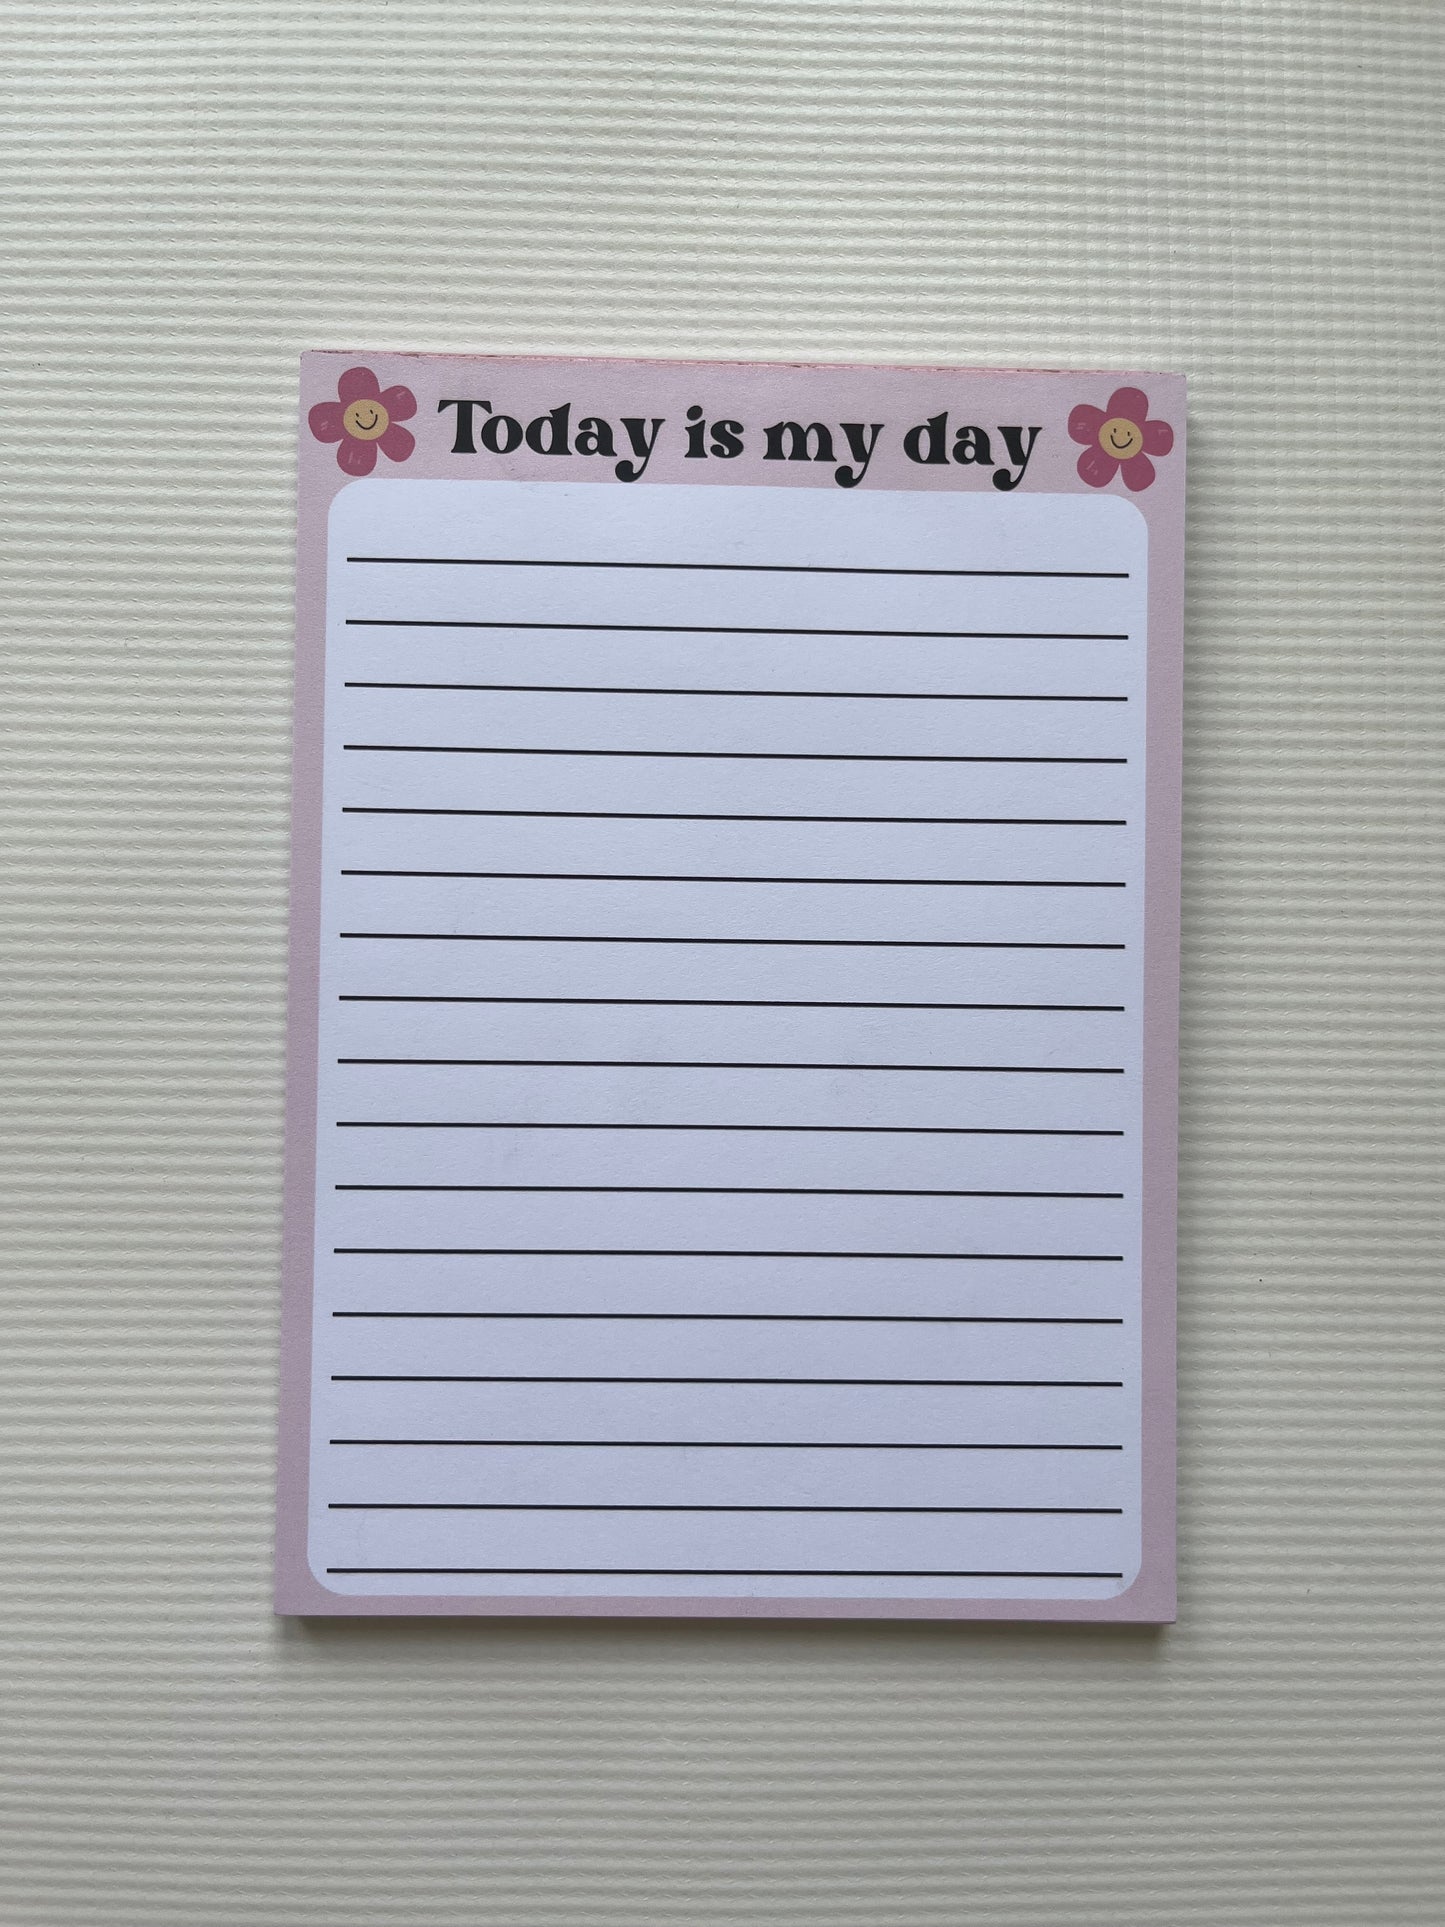 Today is my day notepad